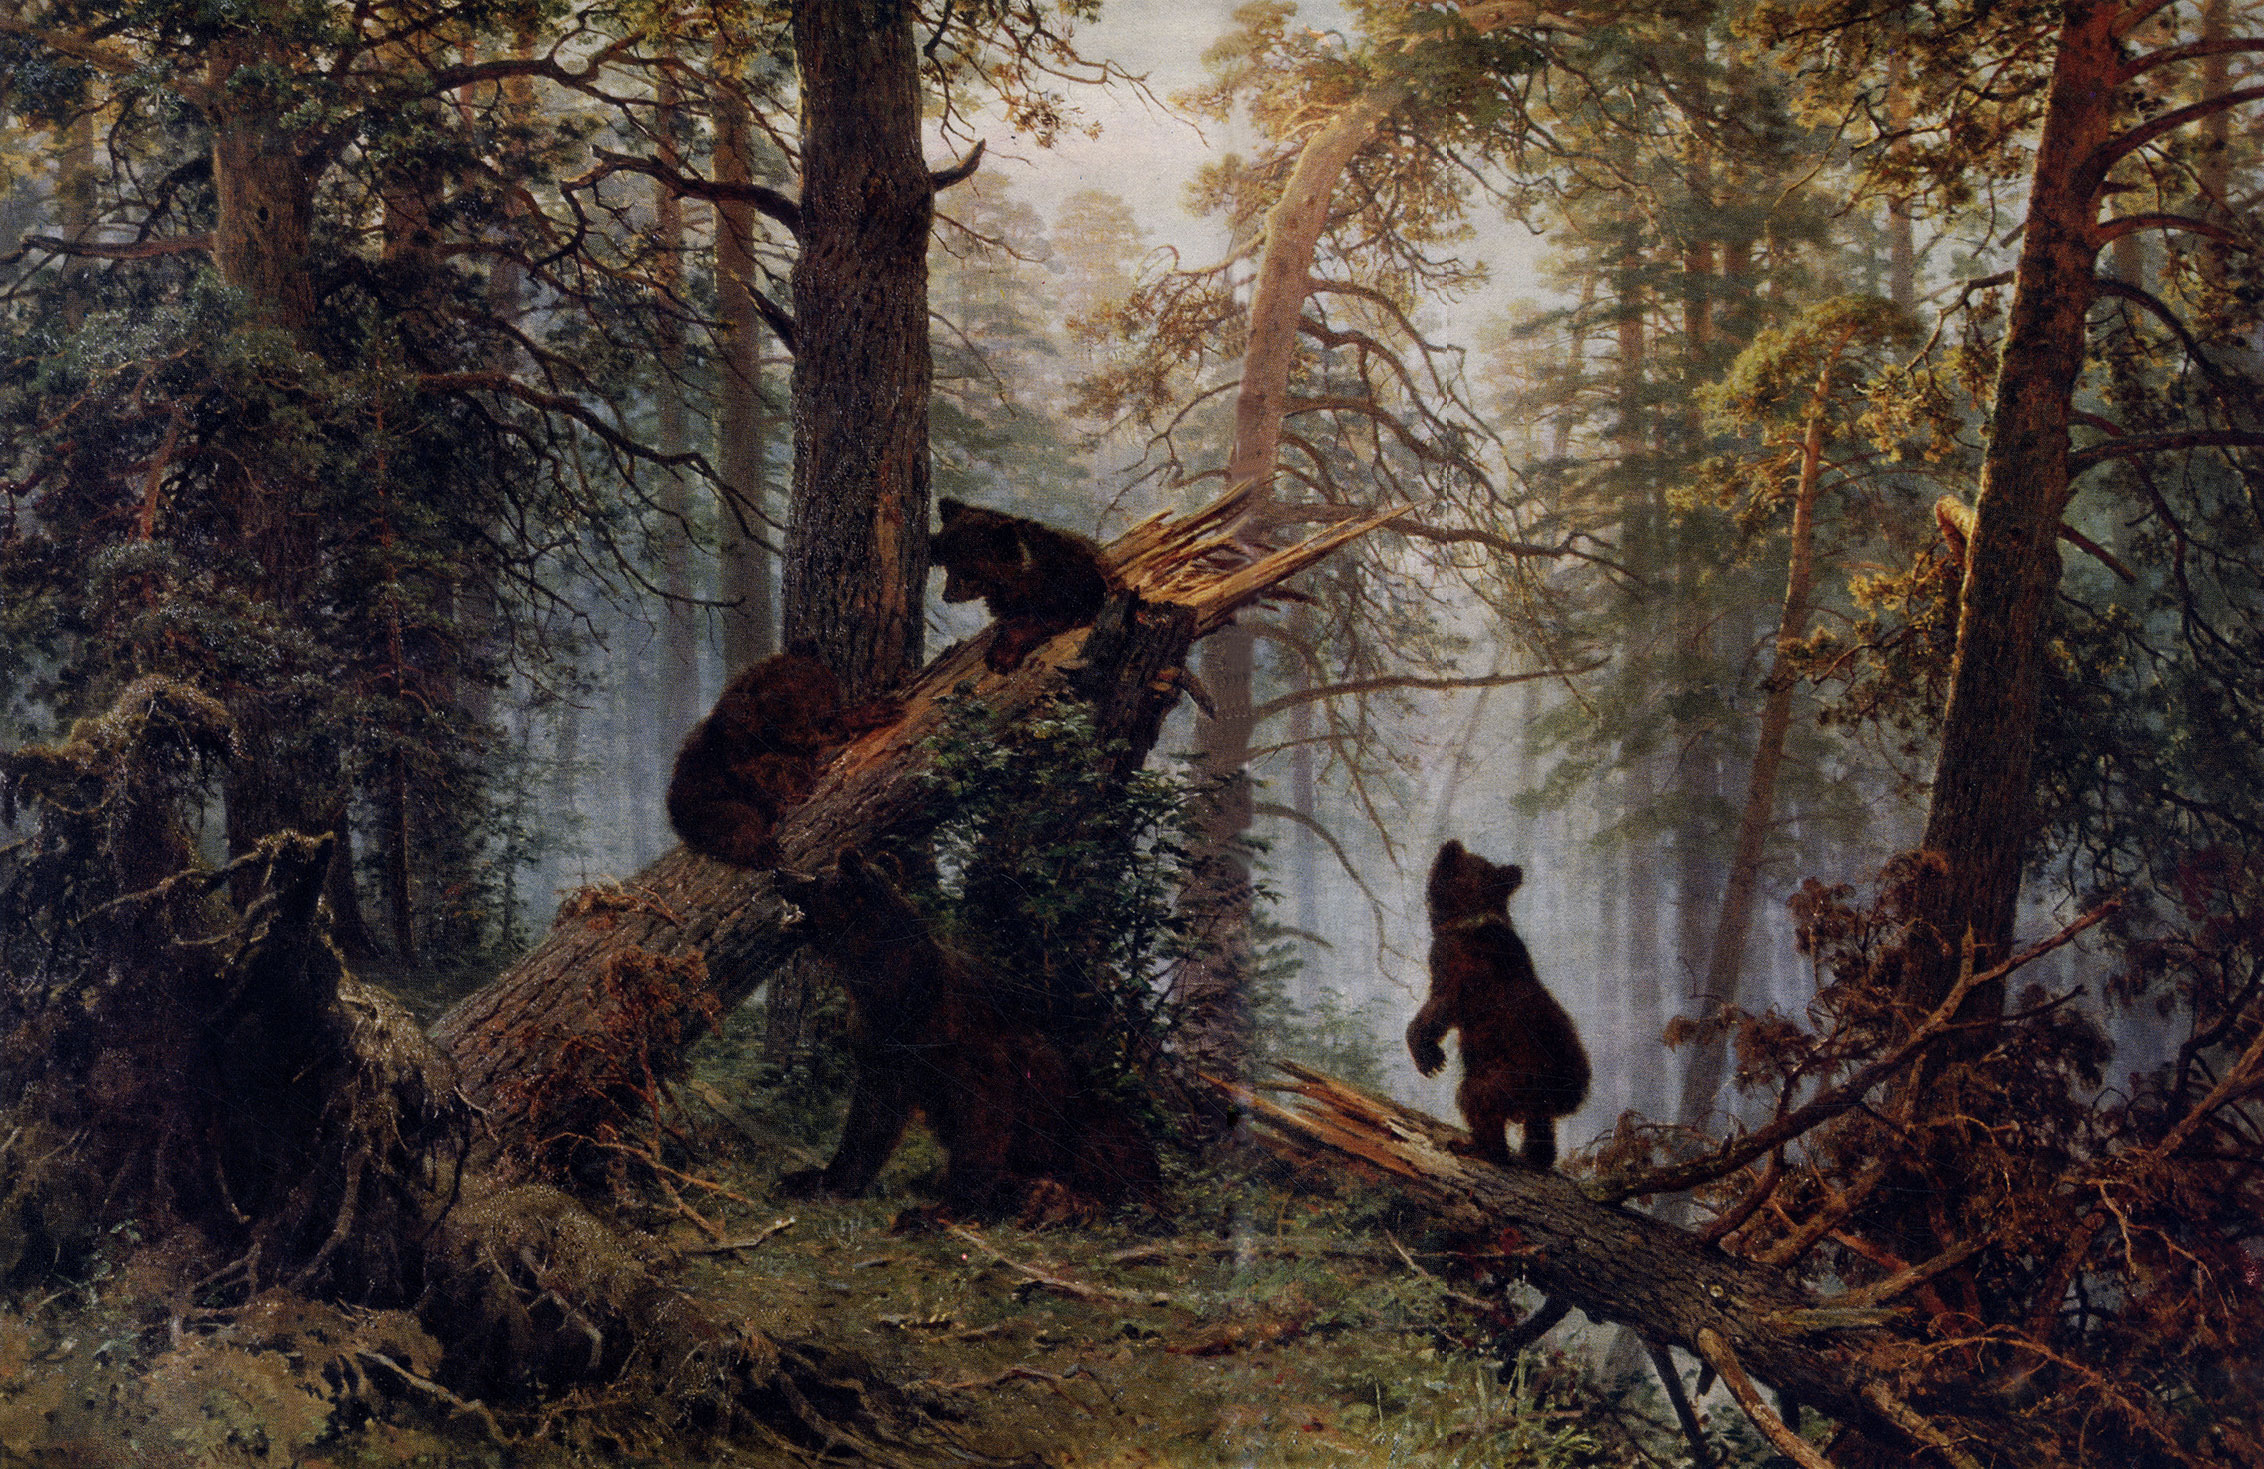 153. Morning in a pine forest. 1889. Oil on canvas. 139X213 cm. The Tretyakov Gallery, Moscow